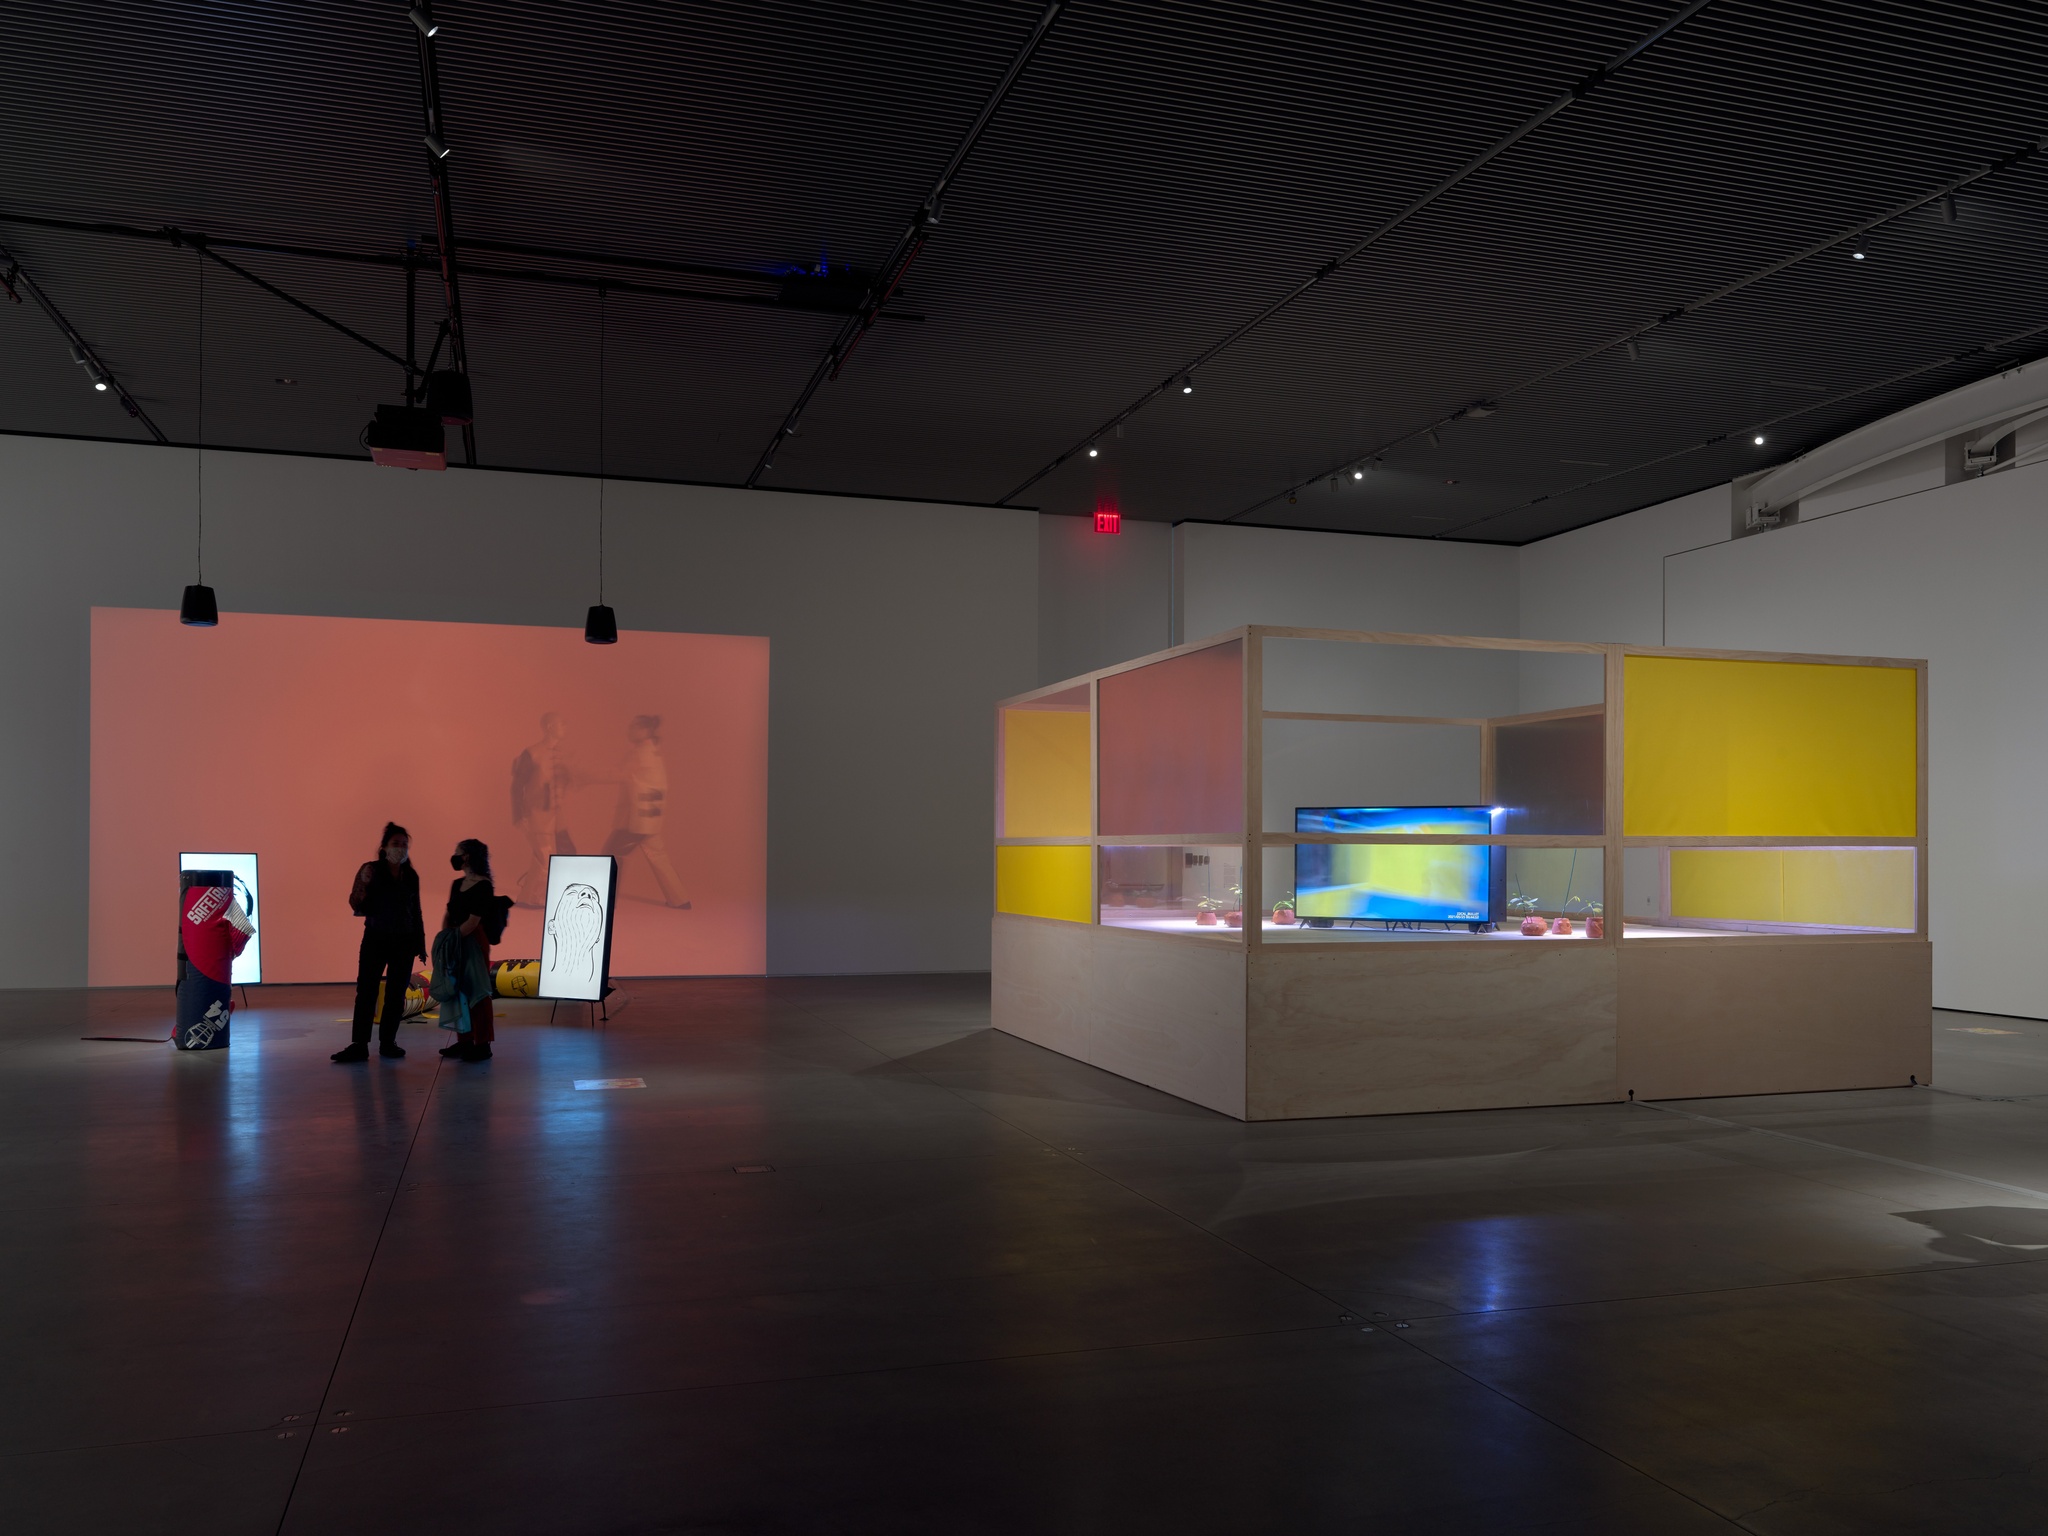 An art gallery with an installation resembling a boxing ring on the right and a video projection on the wall to the left. A couple people stand in front of the video projection.